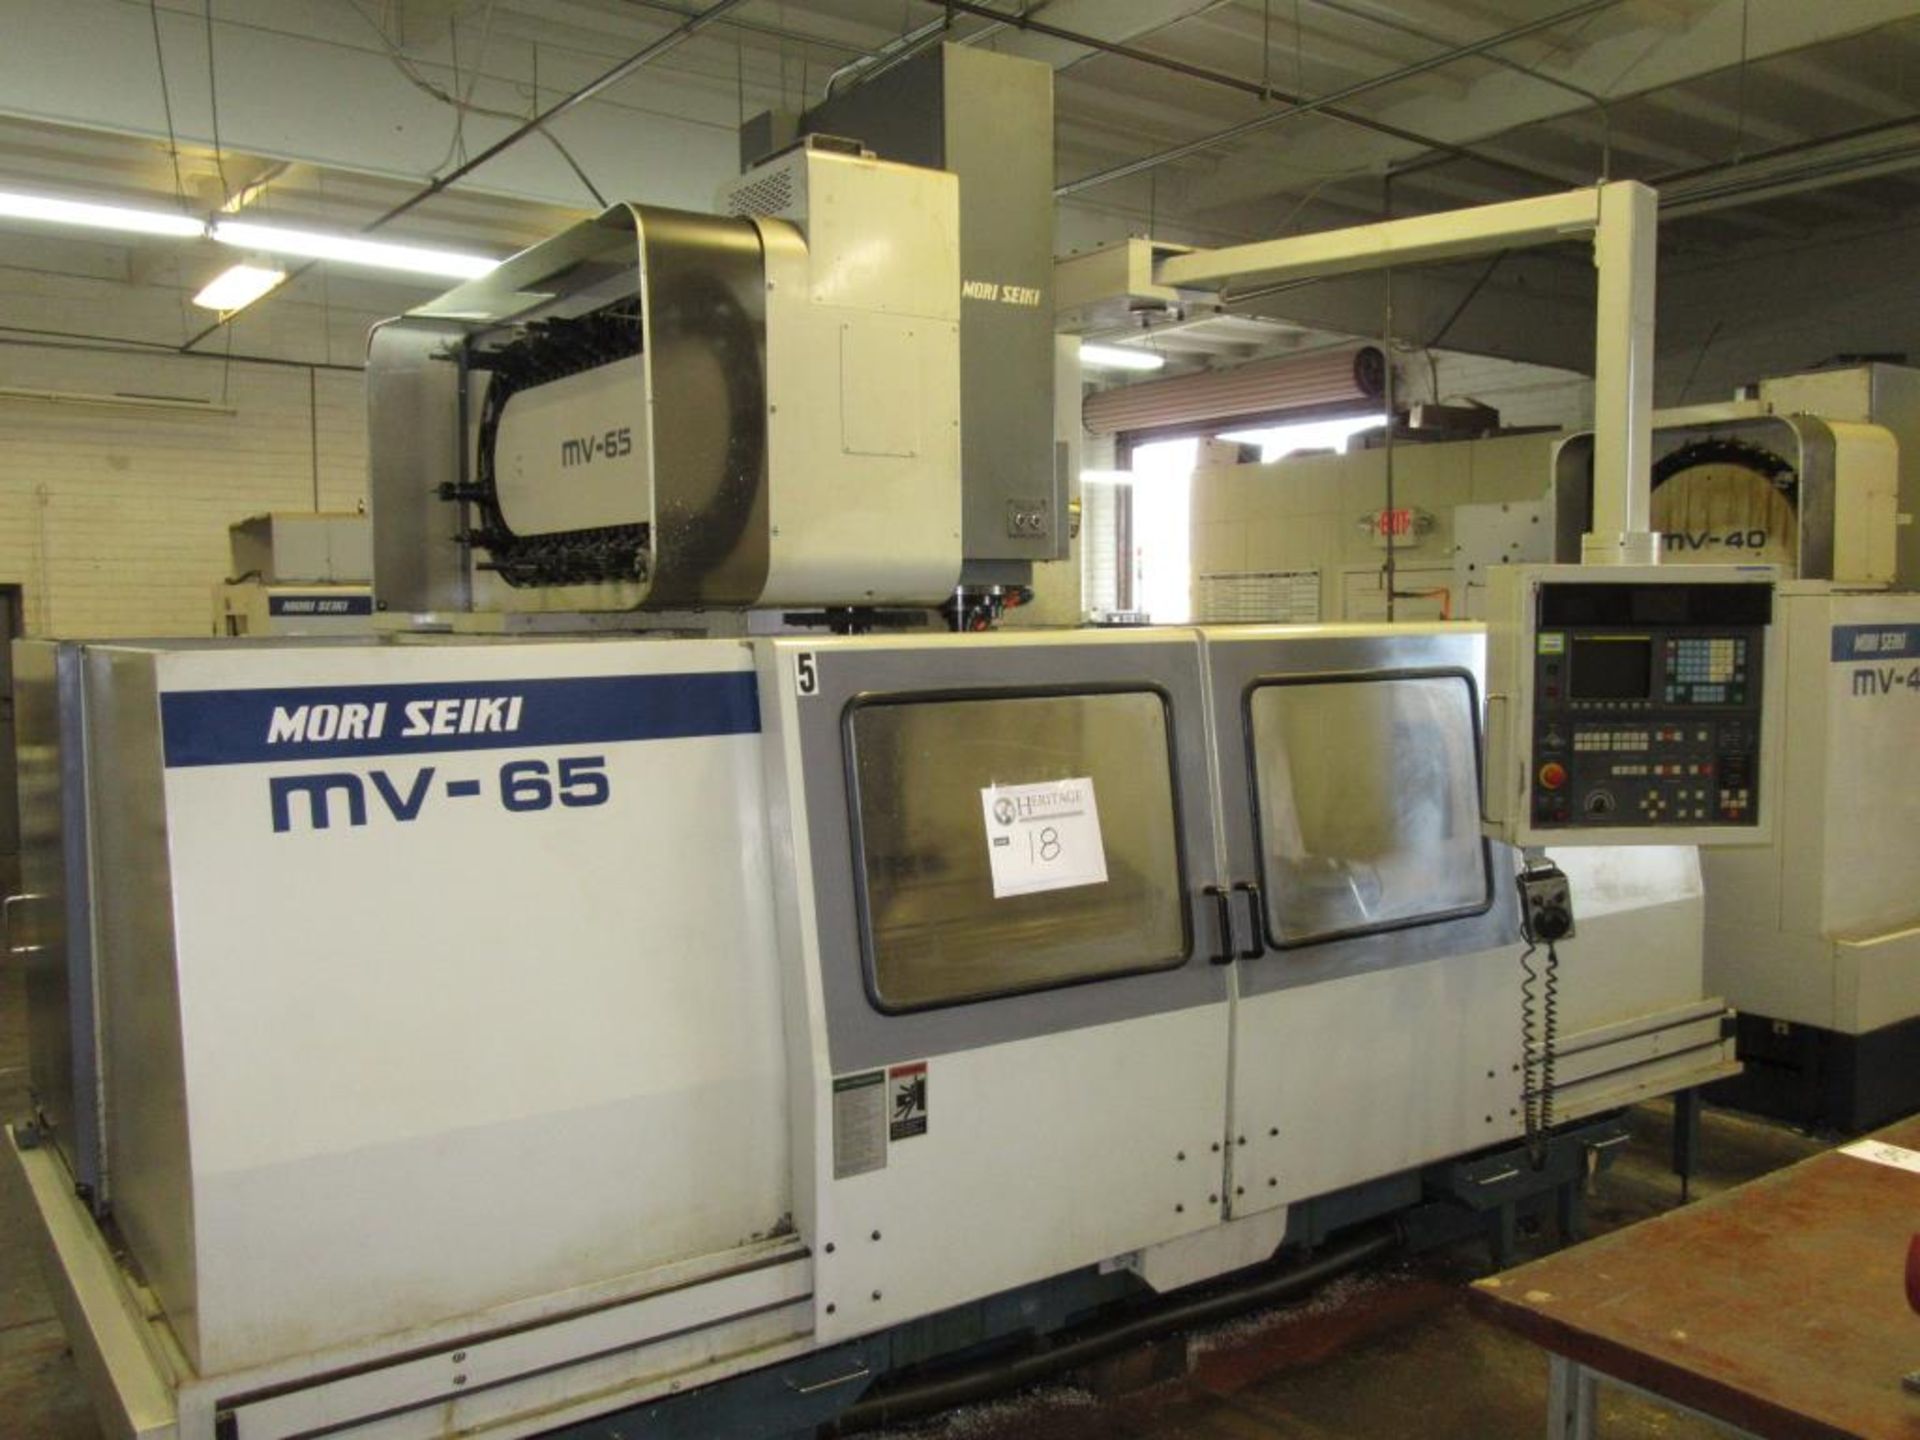 Mori Seiki MV-65/50 1992 - CNC Vertical Machining Center with MF-M4 3-Axis Control Panel, Table Size